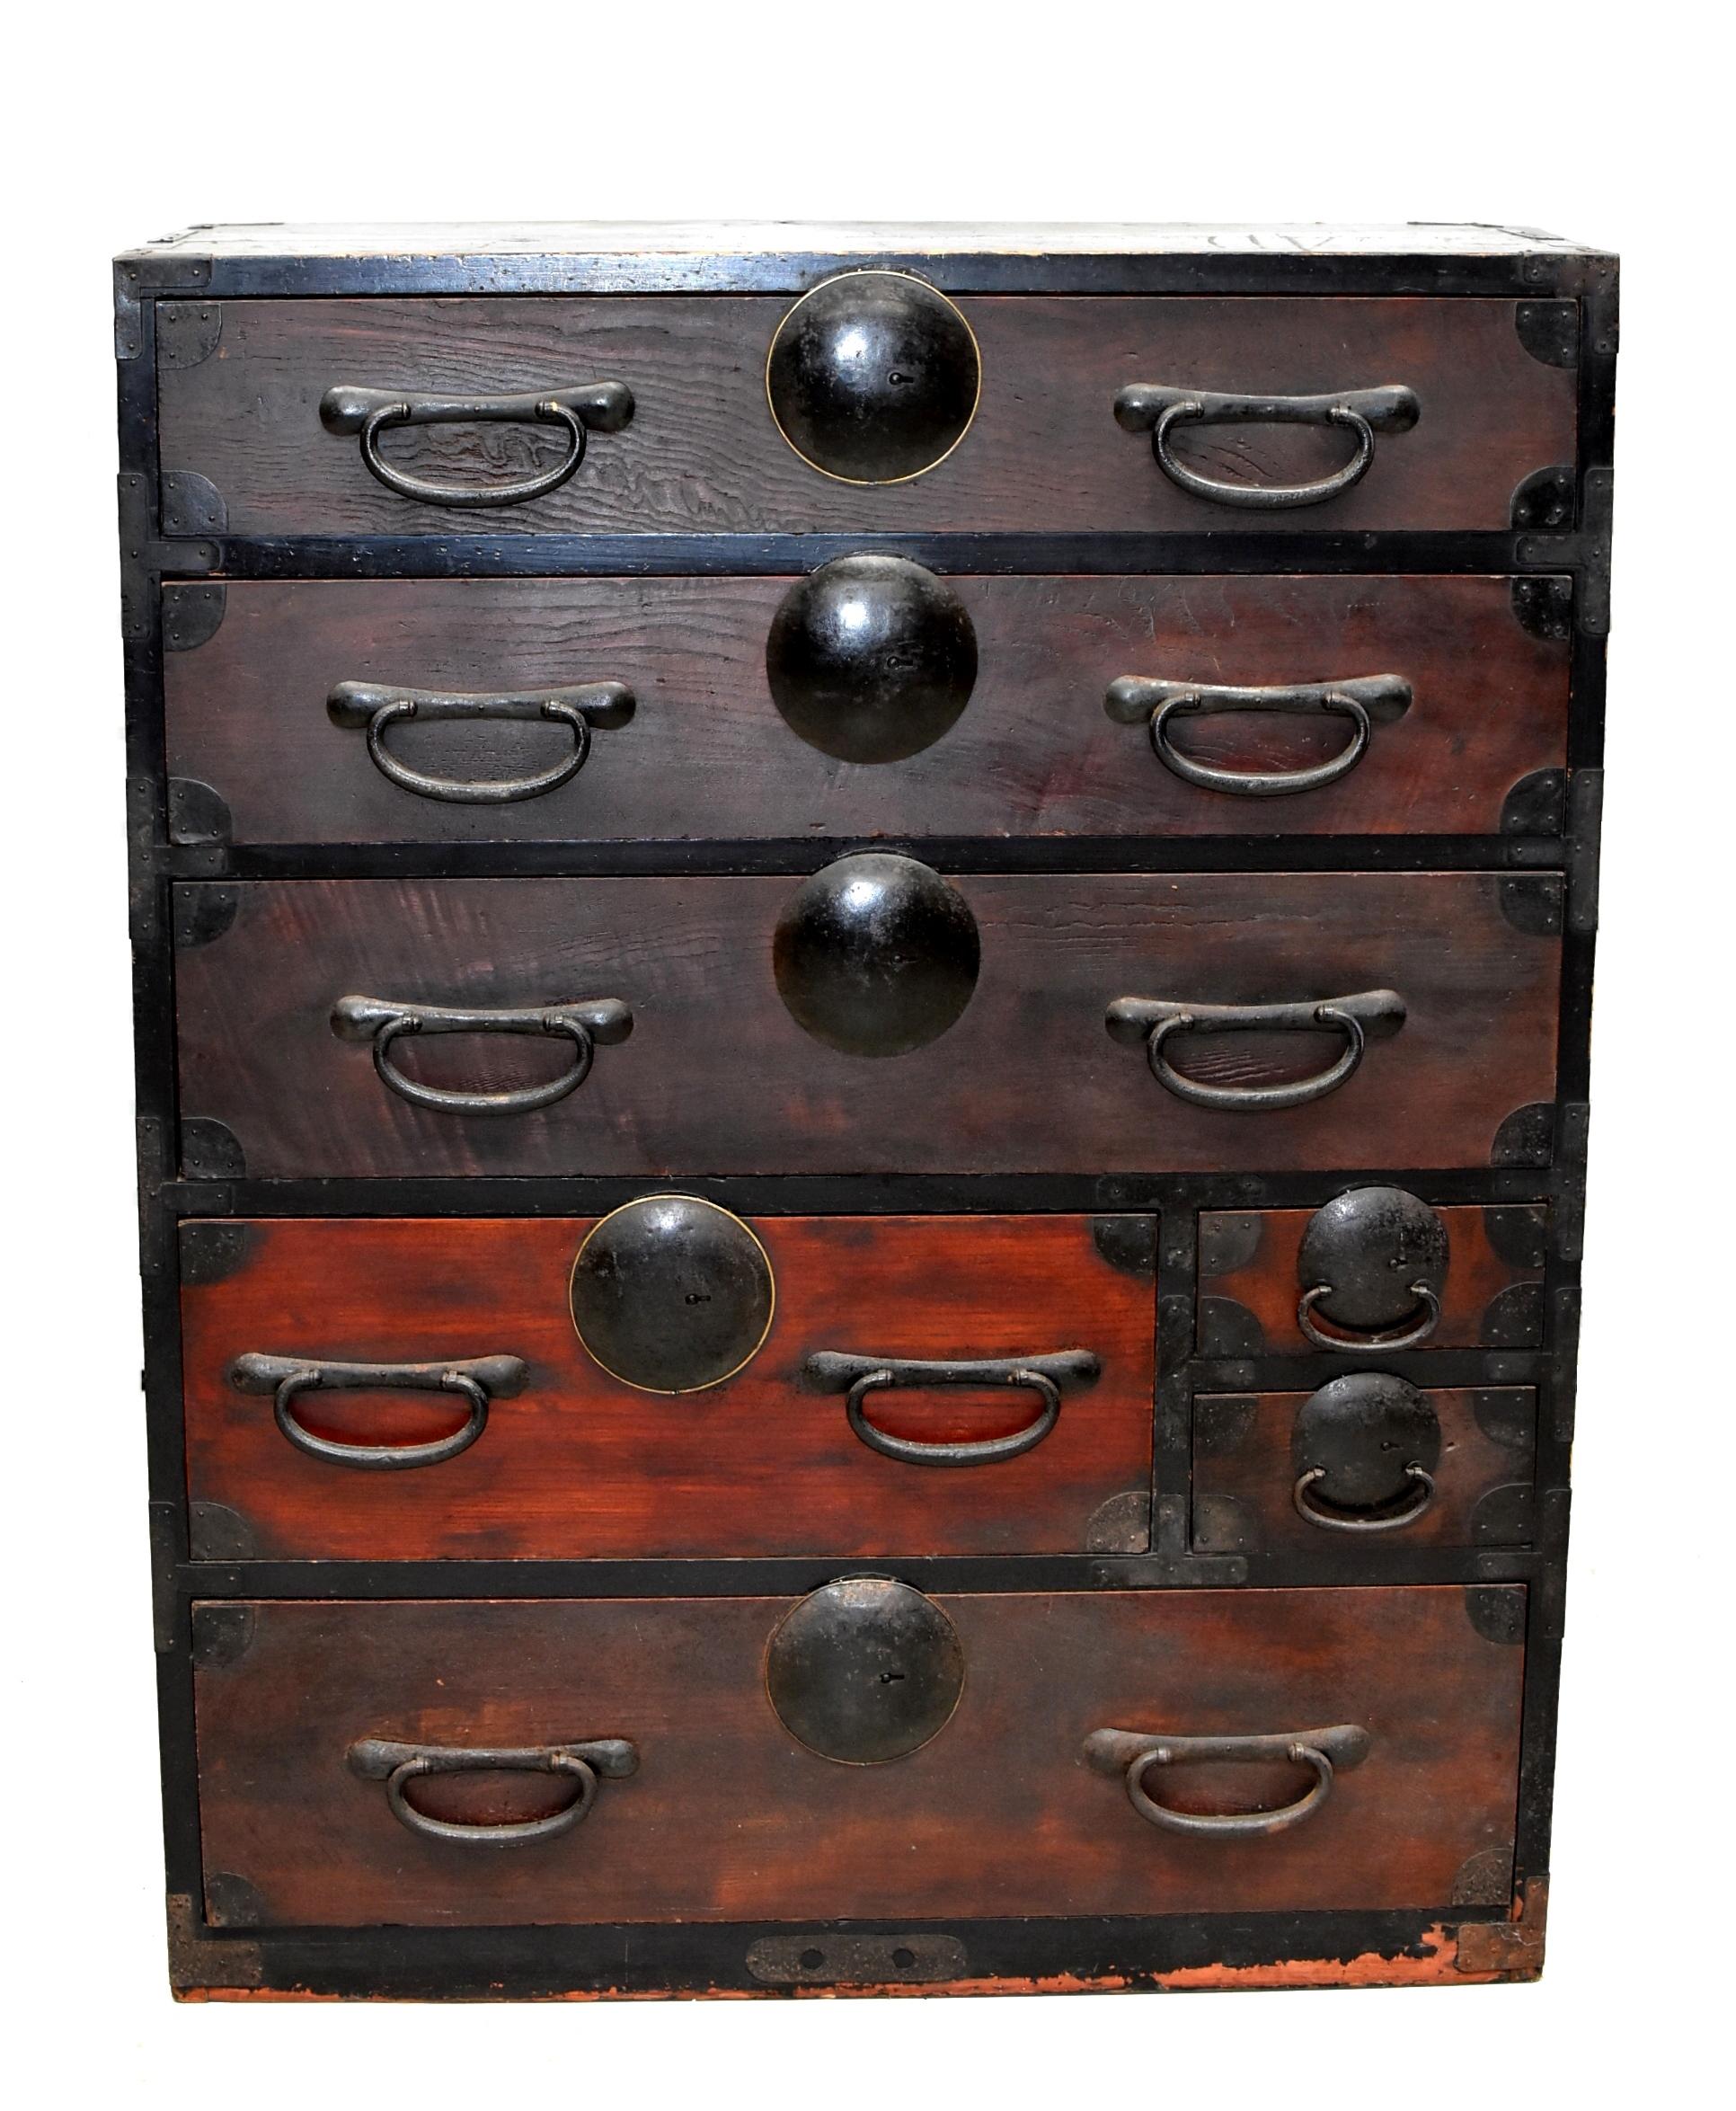 A beautiful vintage, Meiji Period, Japanese Tansu with seven full capacity drawers. Large, unique, solid iron and bronze hardware are simple and timeless. This piece is very similar to the other Black Tansu listed. They have the same design and